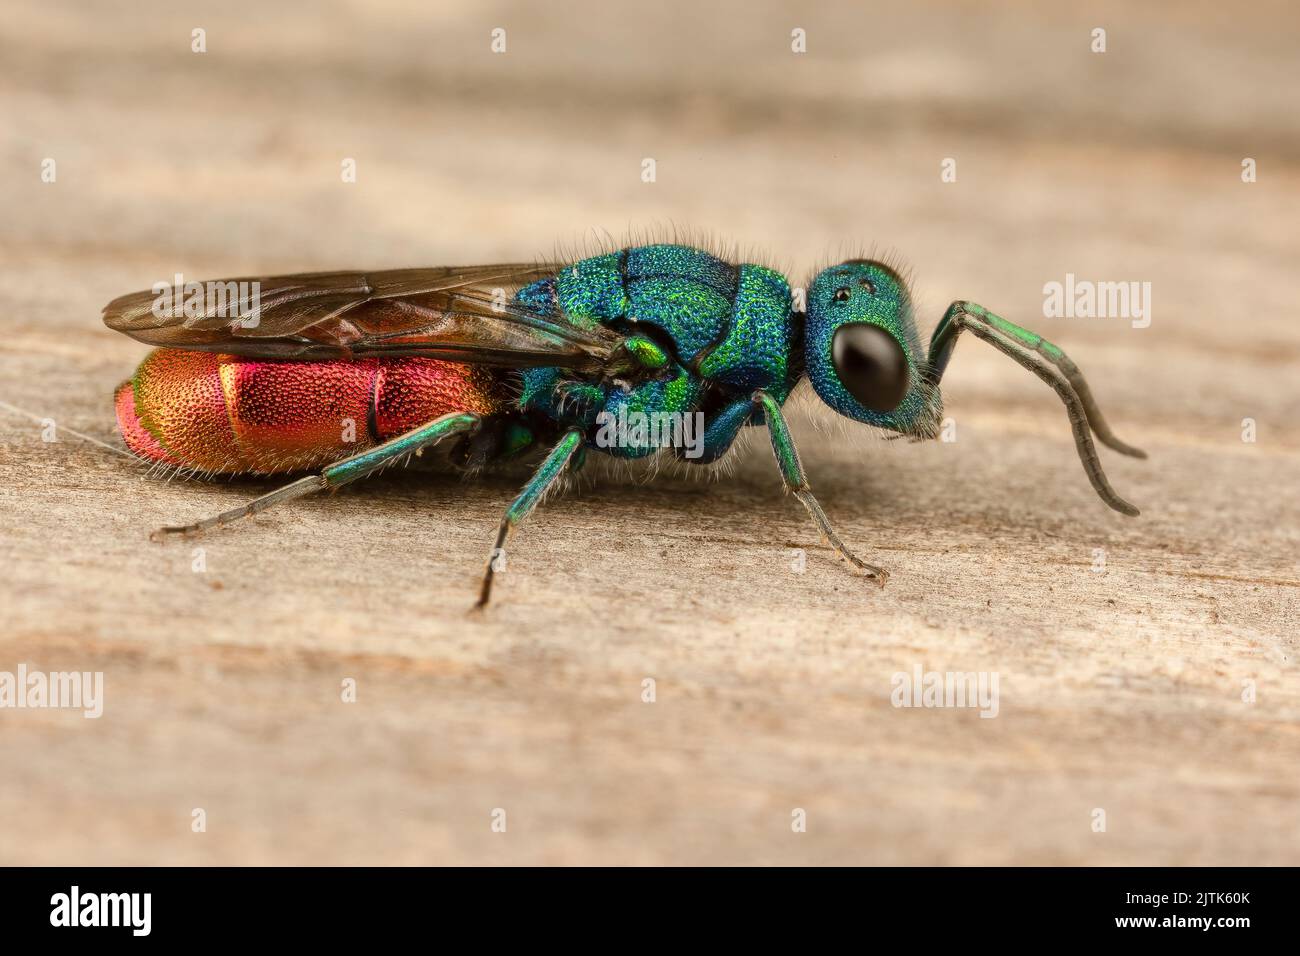 A spectacular metallic ruby-tailed (parasitic) wasp. Stock Photo